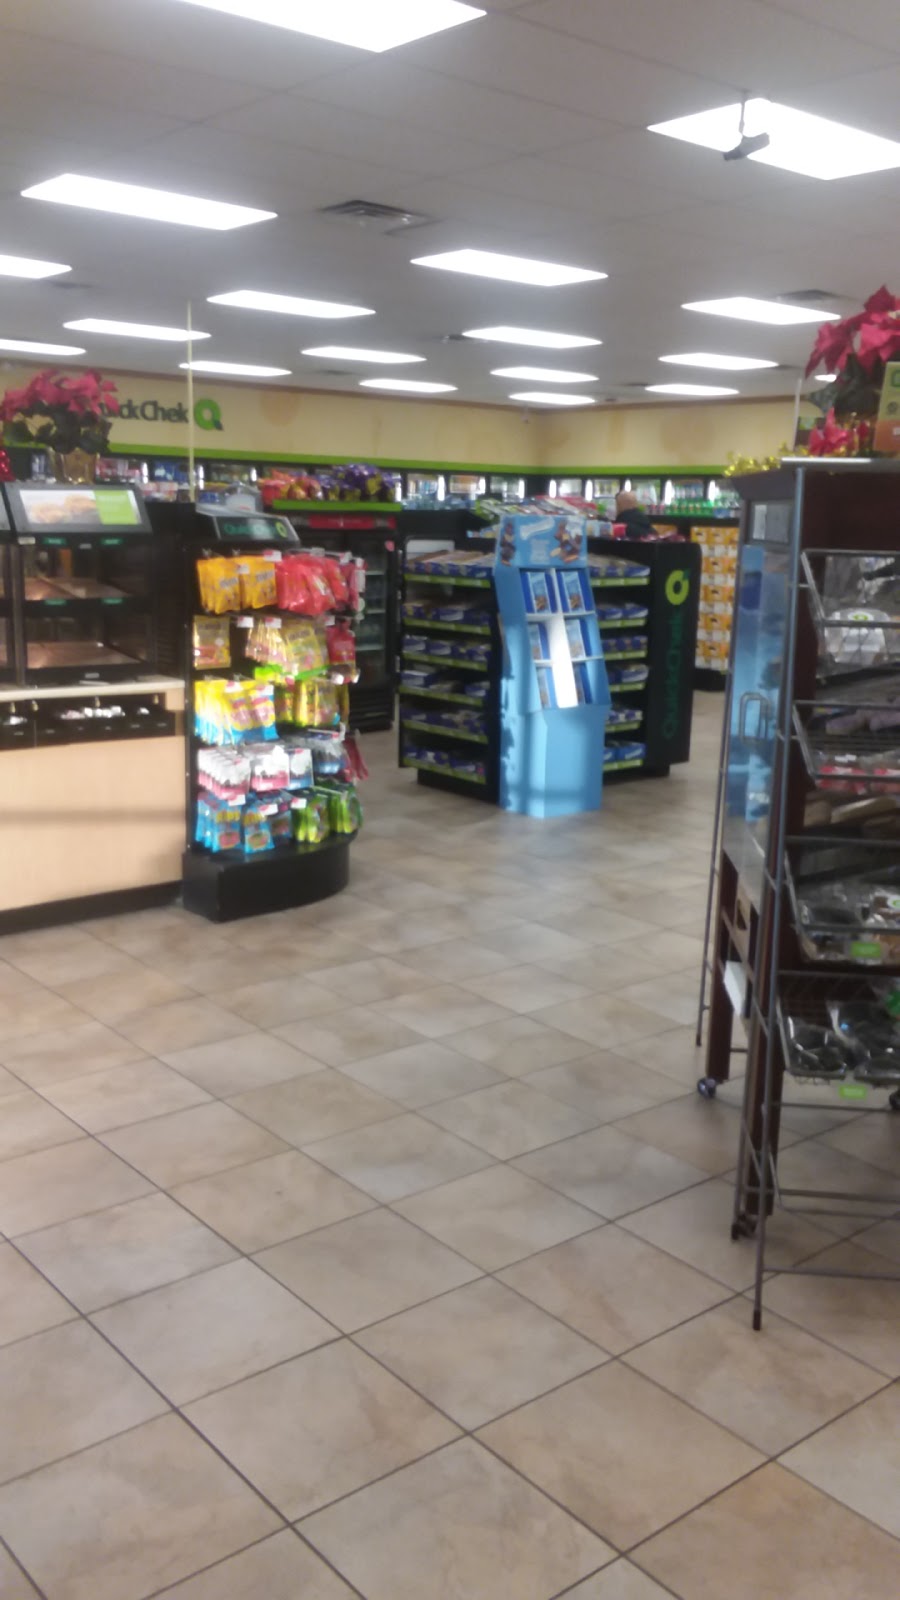 QuickChek | 751-753 Route 211 East, NY-211, Middletown, NY 10941 | Phone: (845) 692-2871